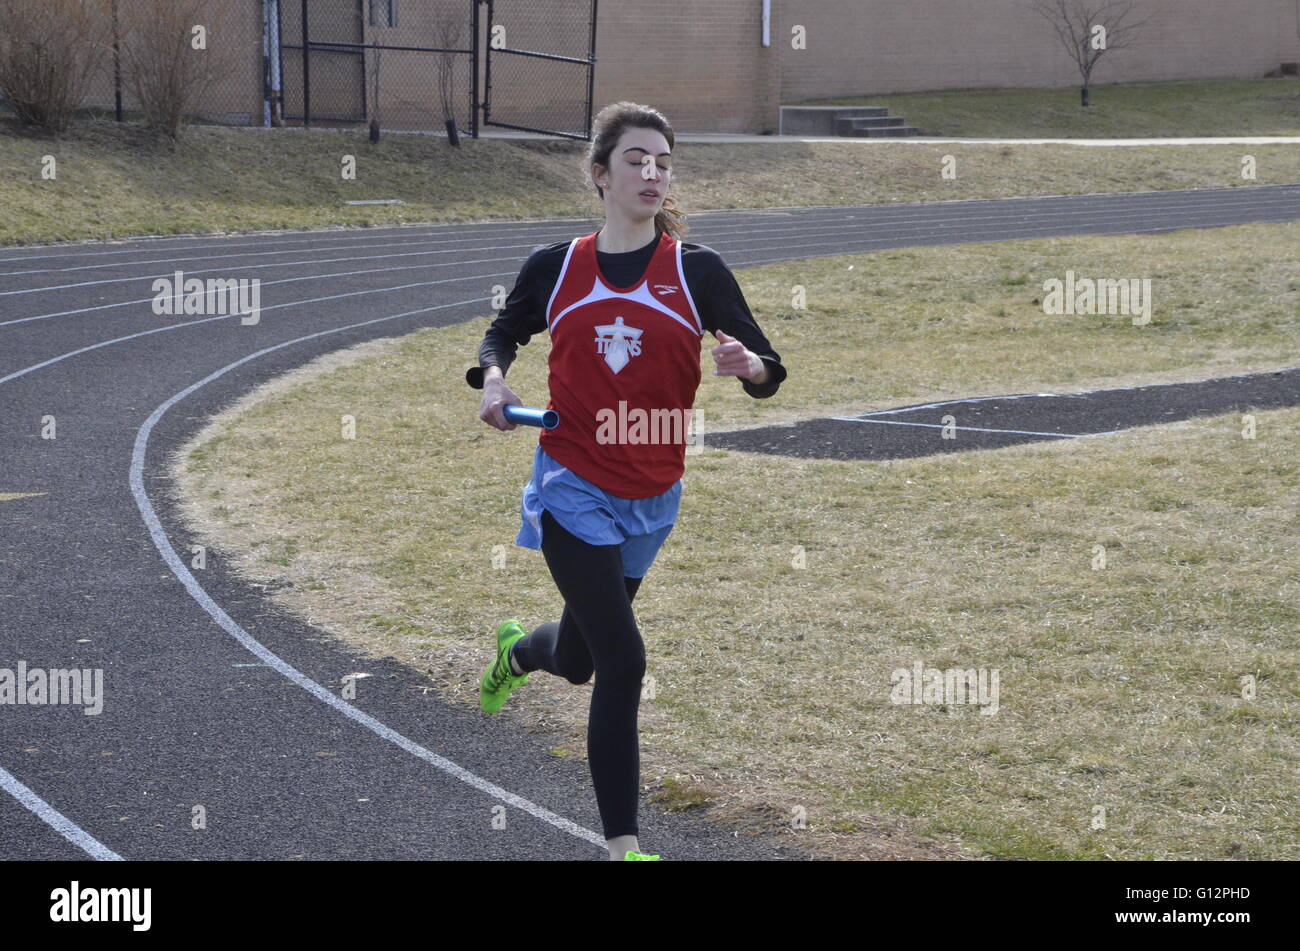 Runner in relay race in a track meet Stock Photo